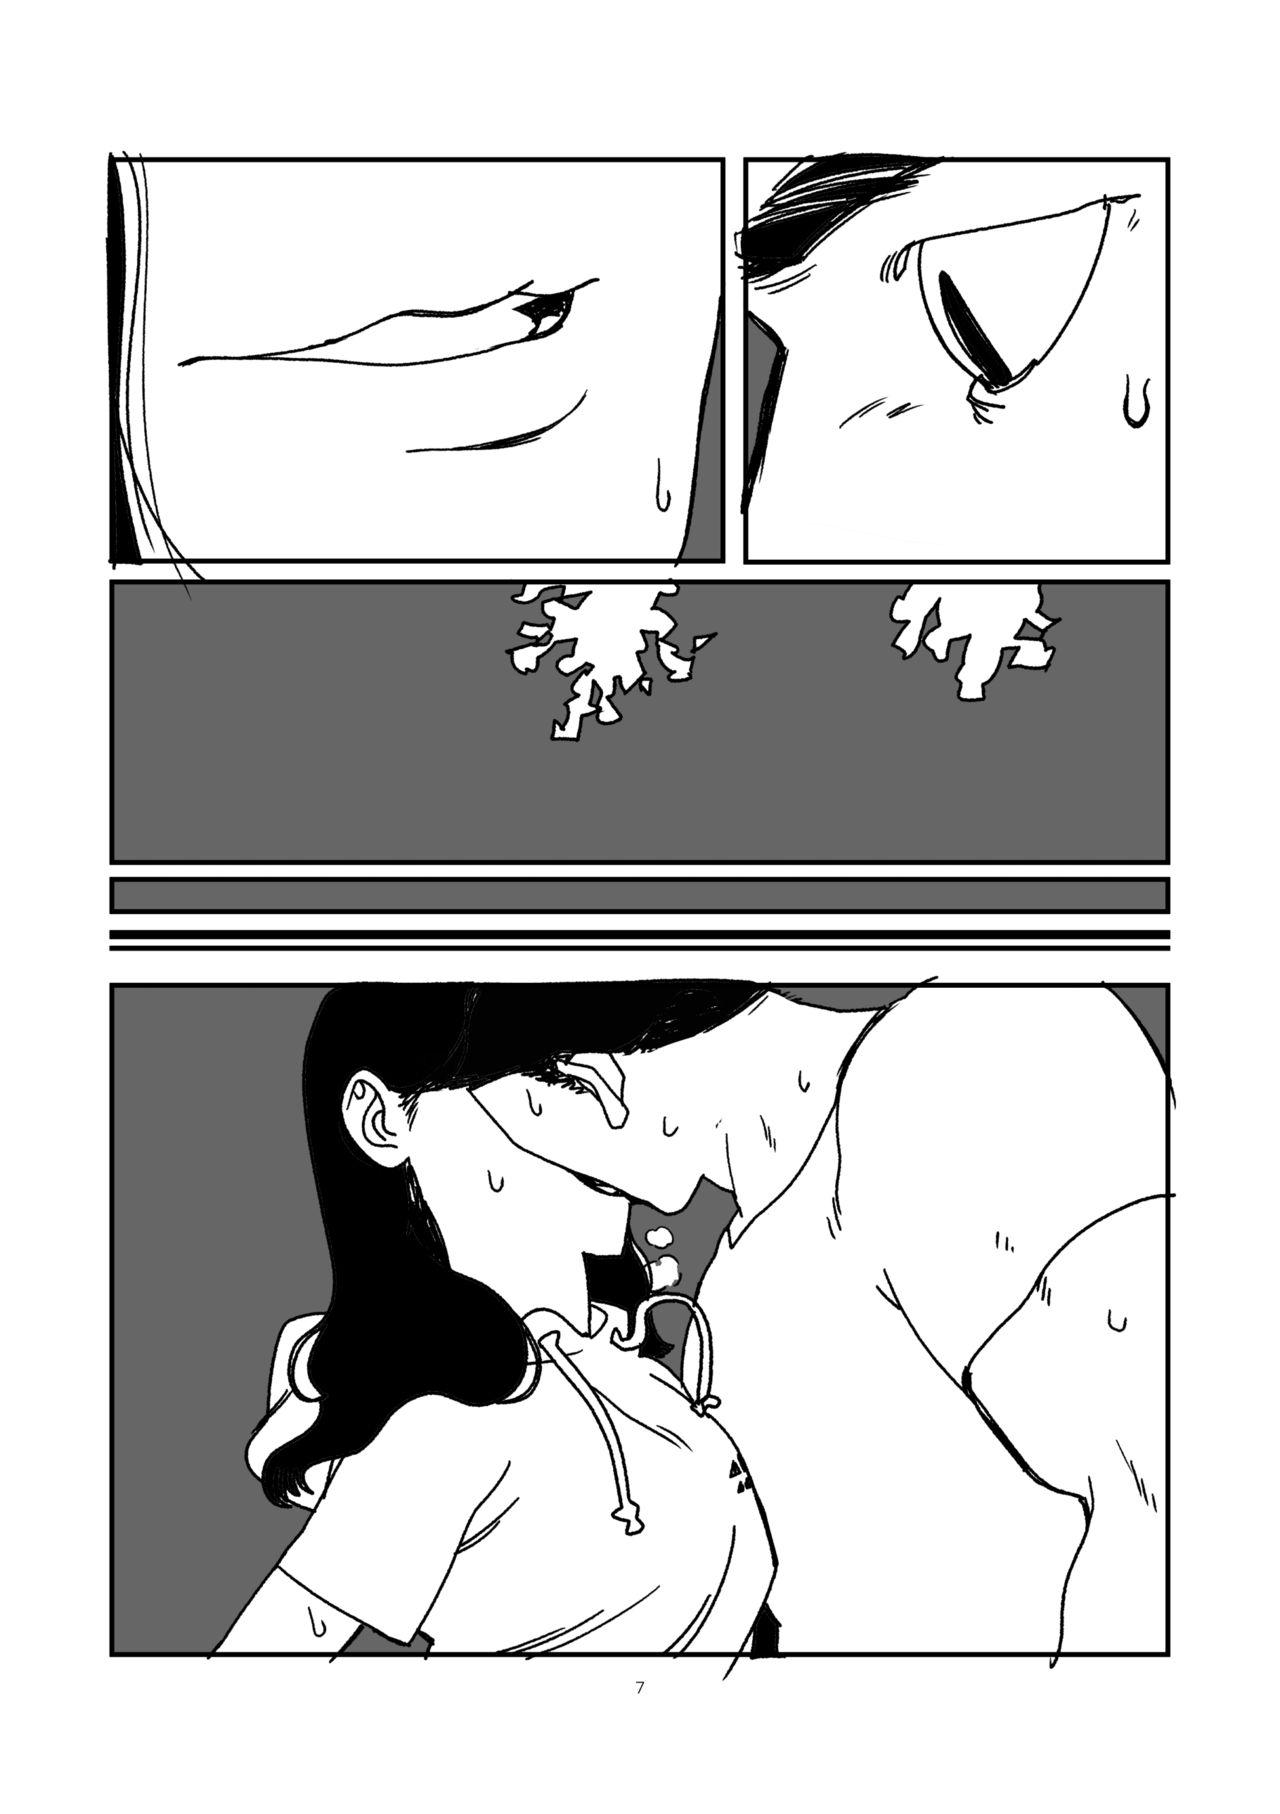 Best Blow Job Ever 무제 Small Tits - Page 7